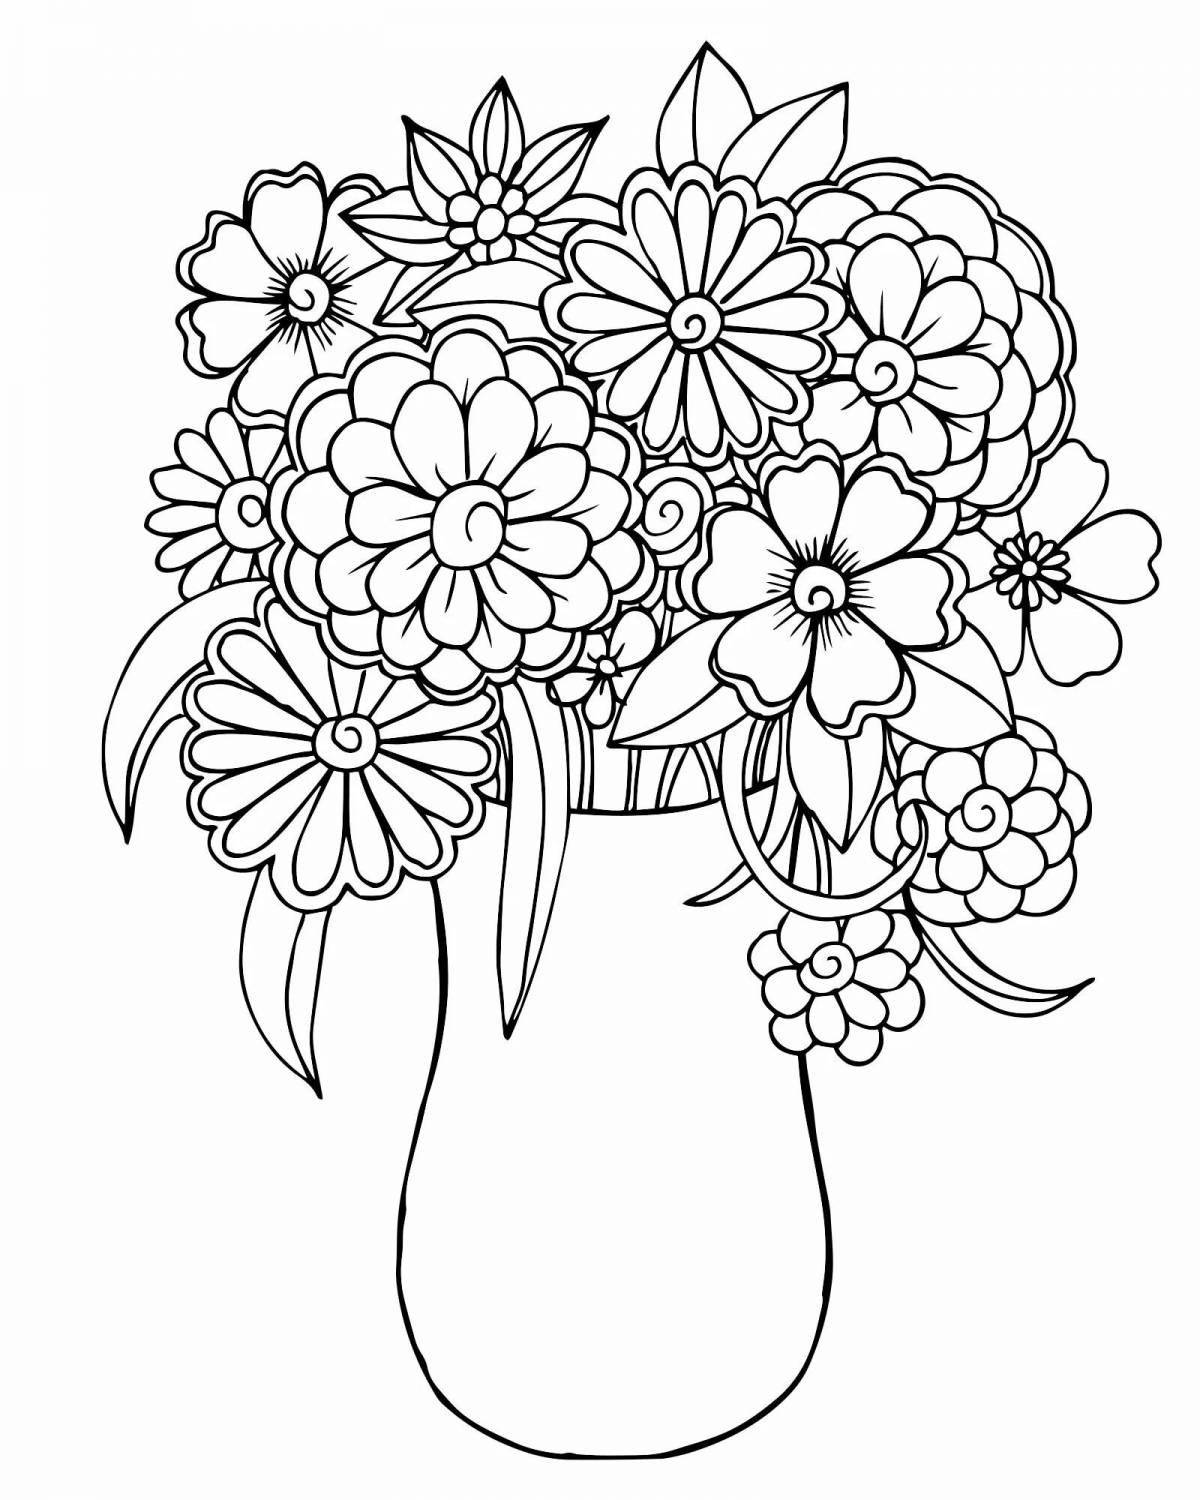 Coloring book shining bouquet for preschoolers